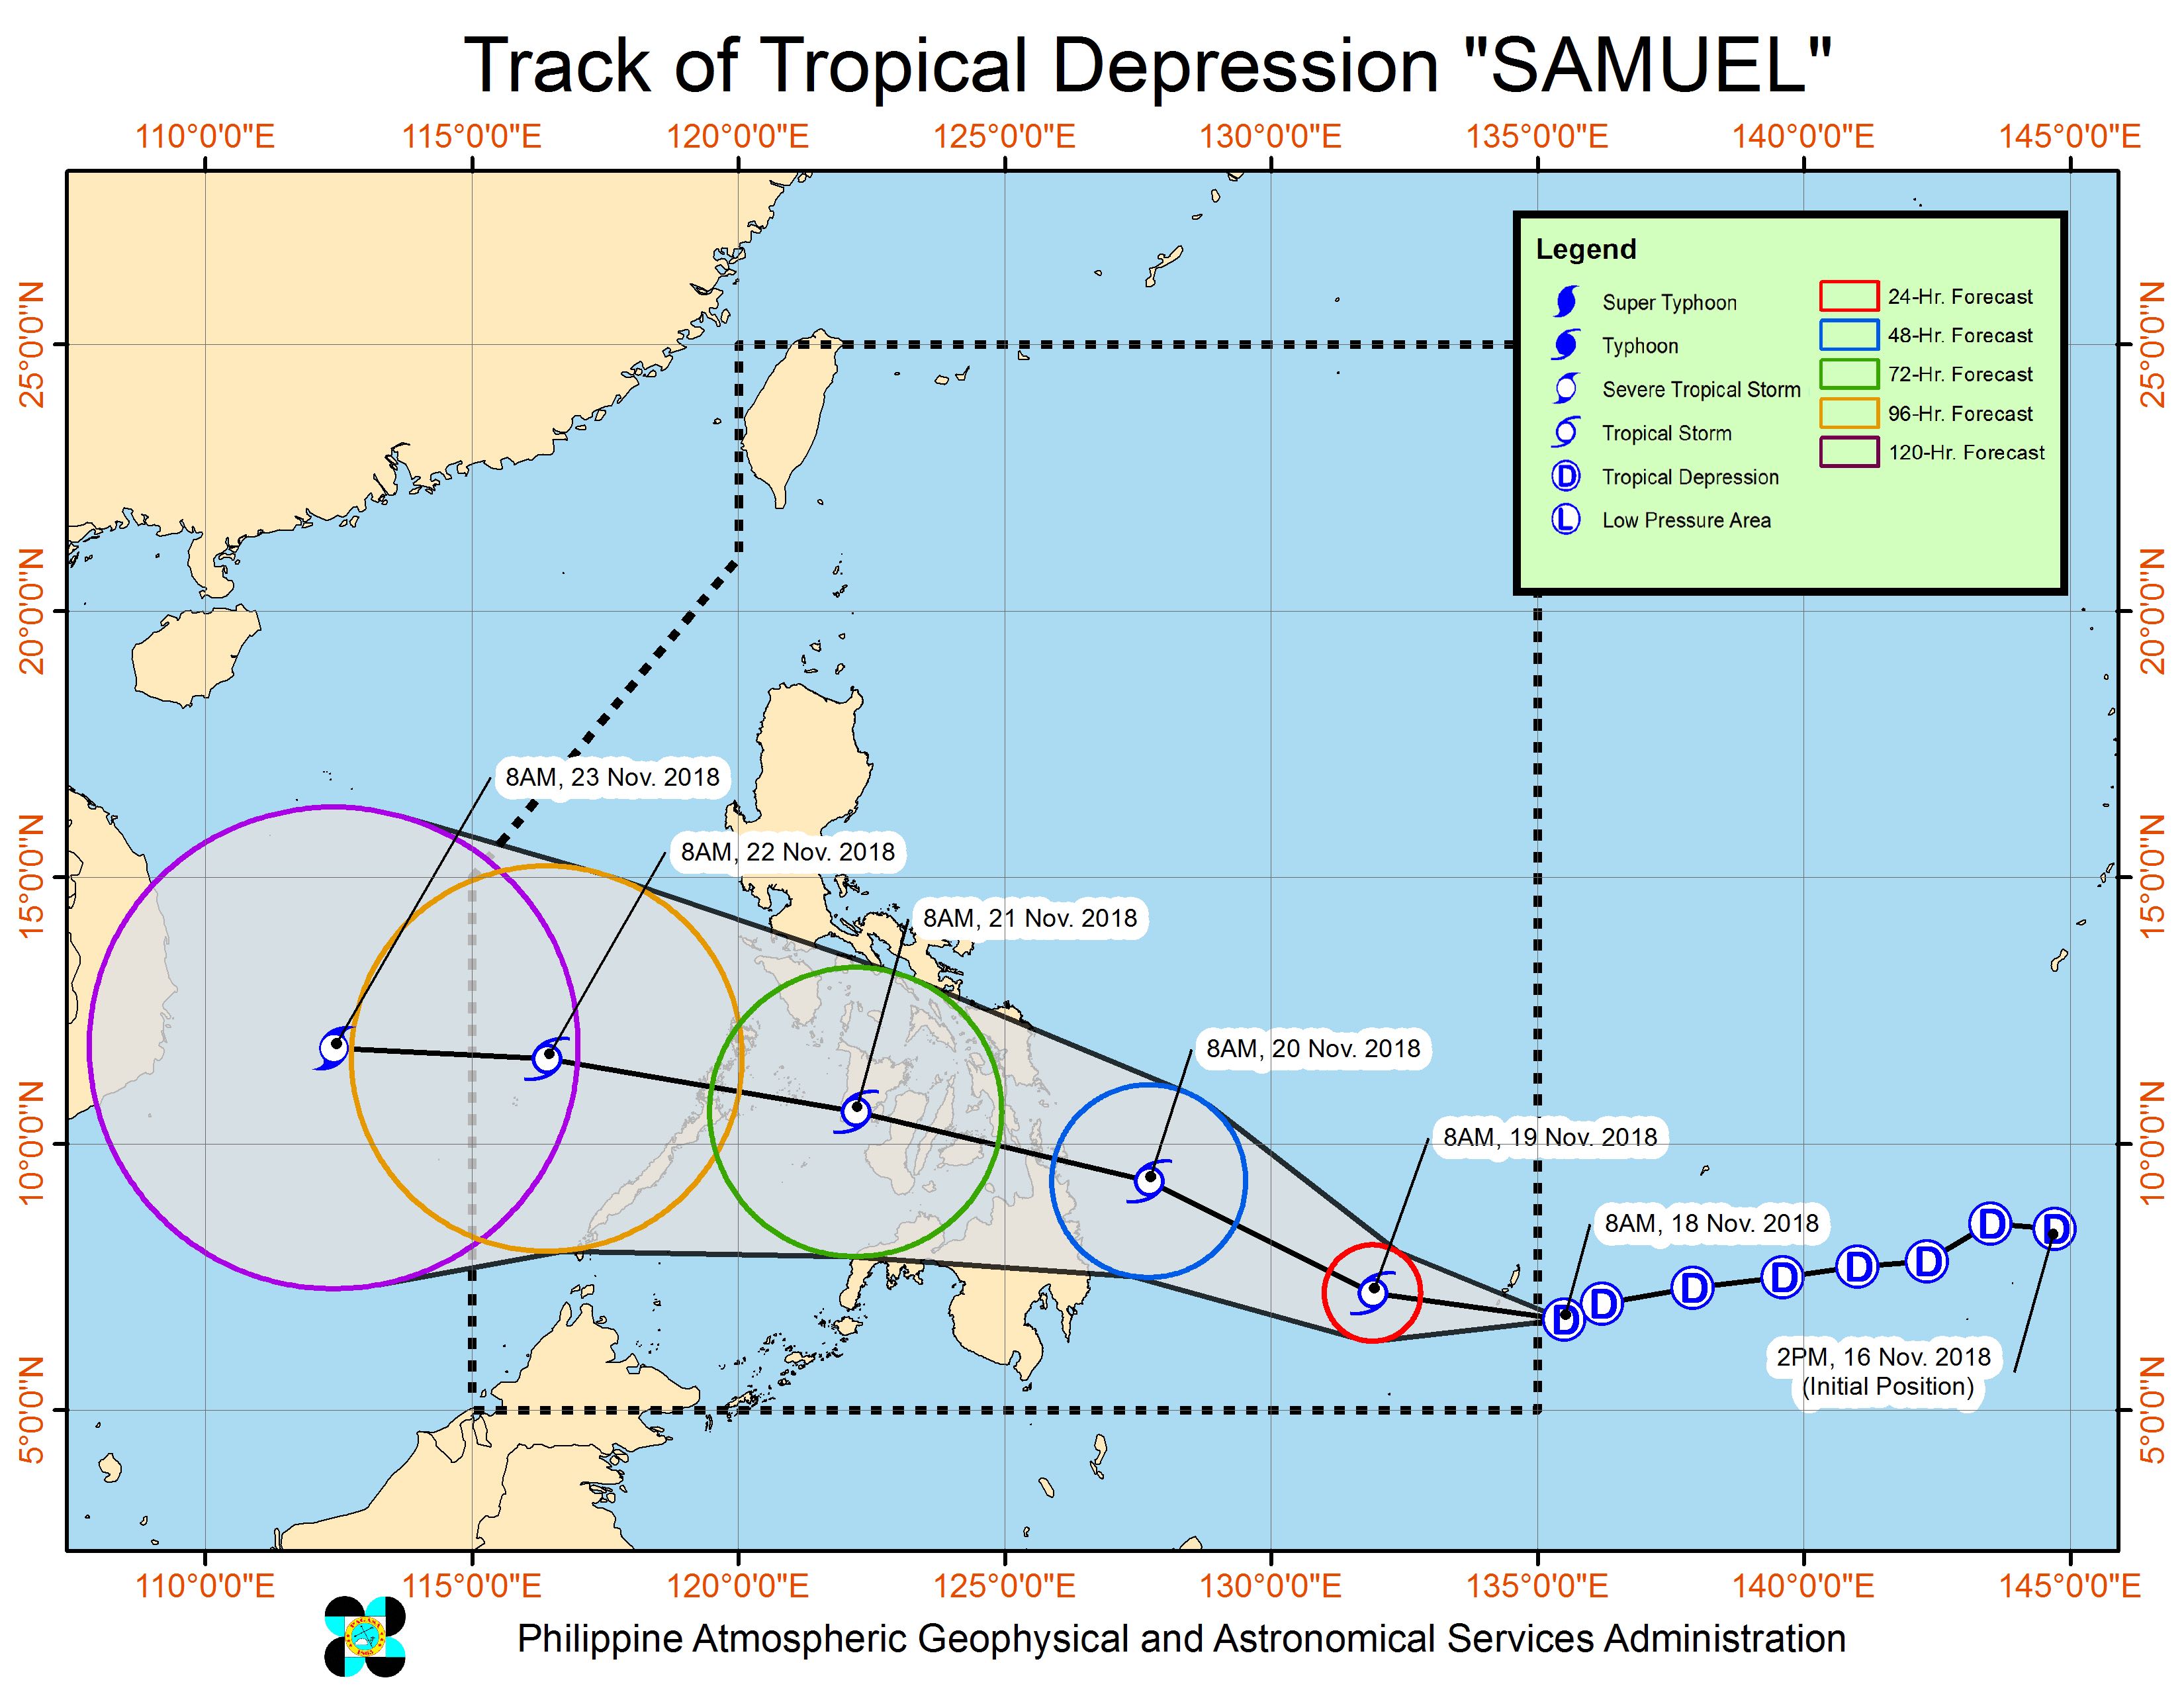 Forecast track of Tropical Depression Samuel as of November 18, 2018, 11 am. Image from PAGASA 